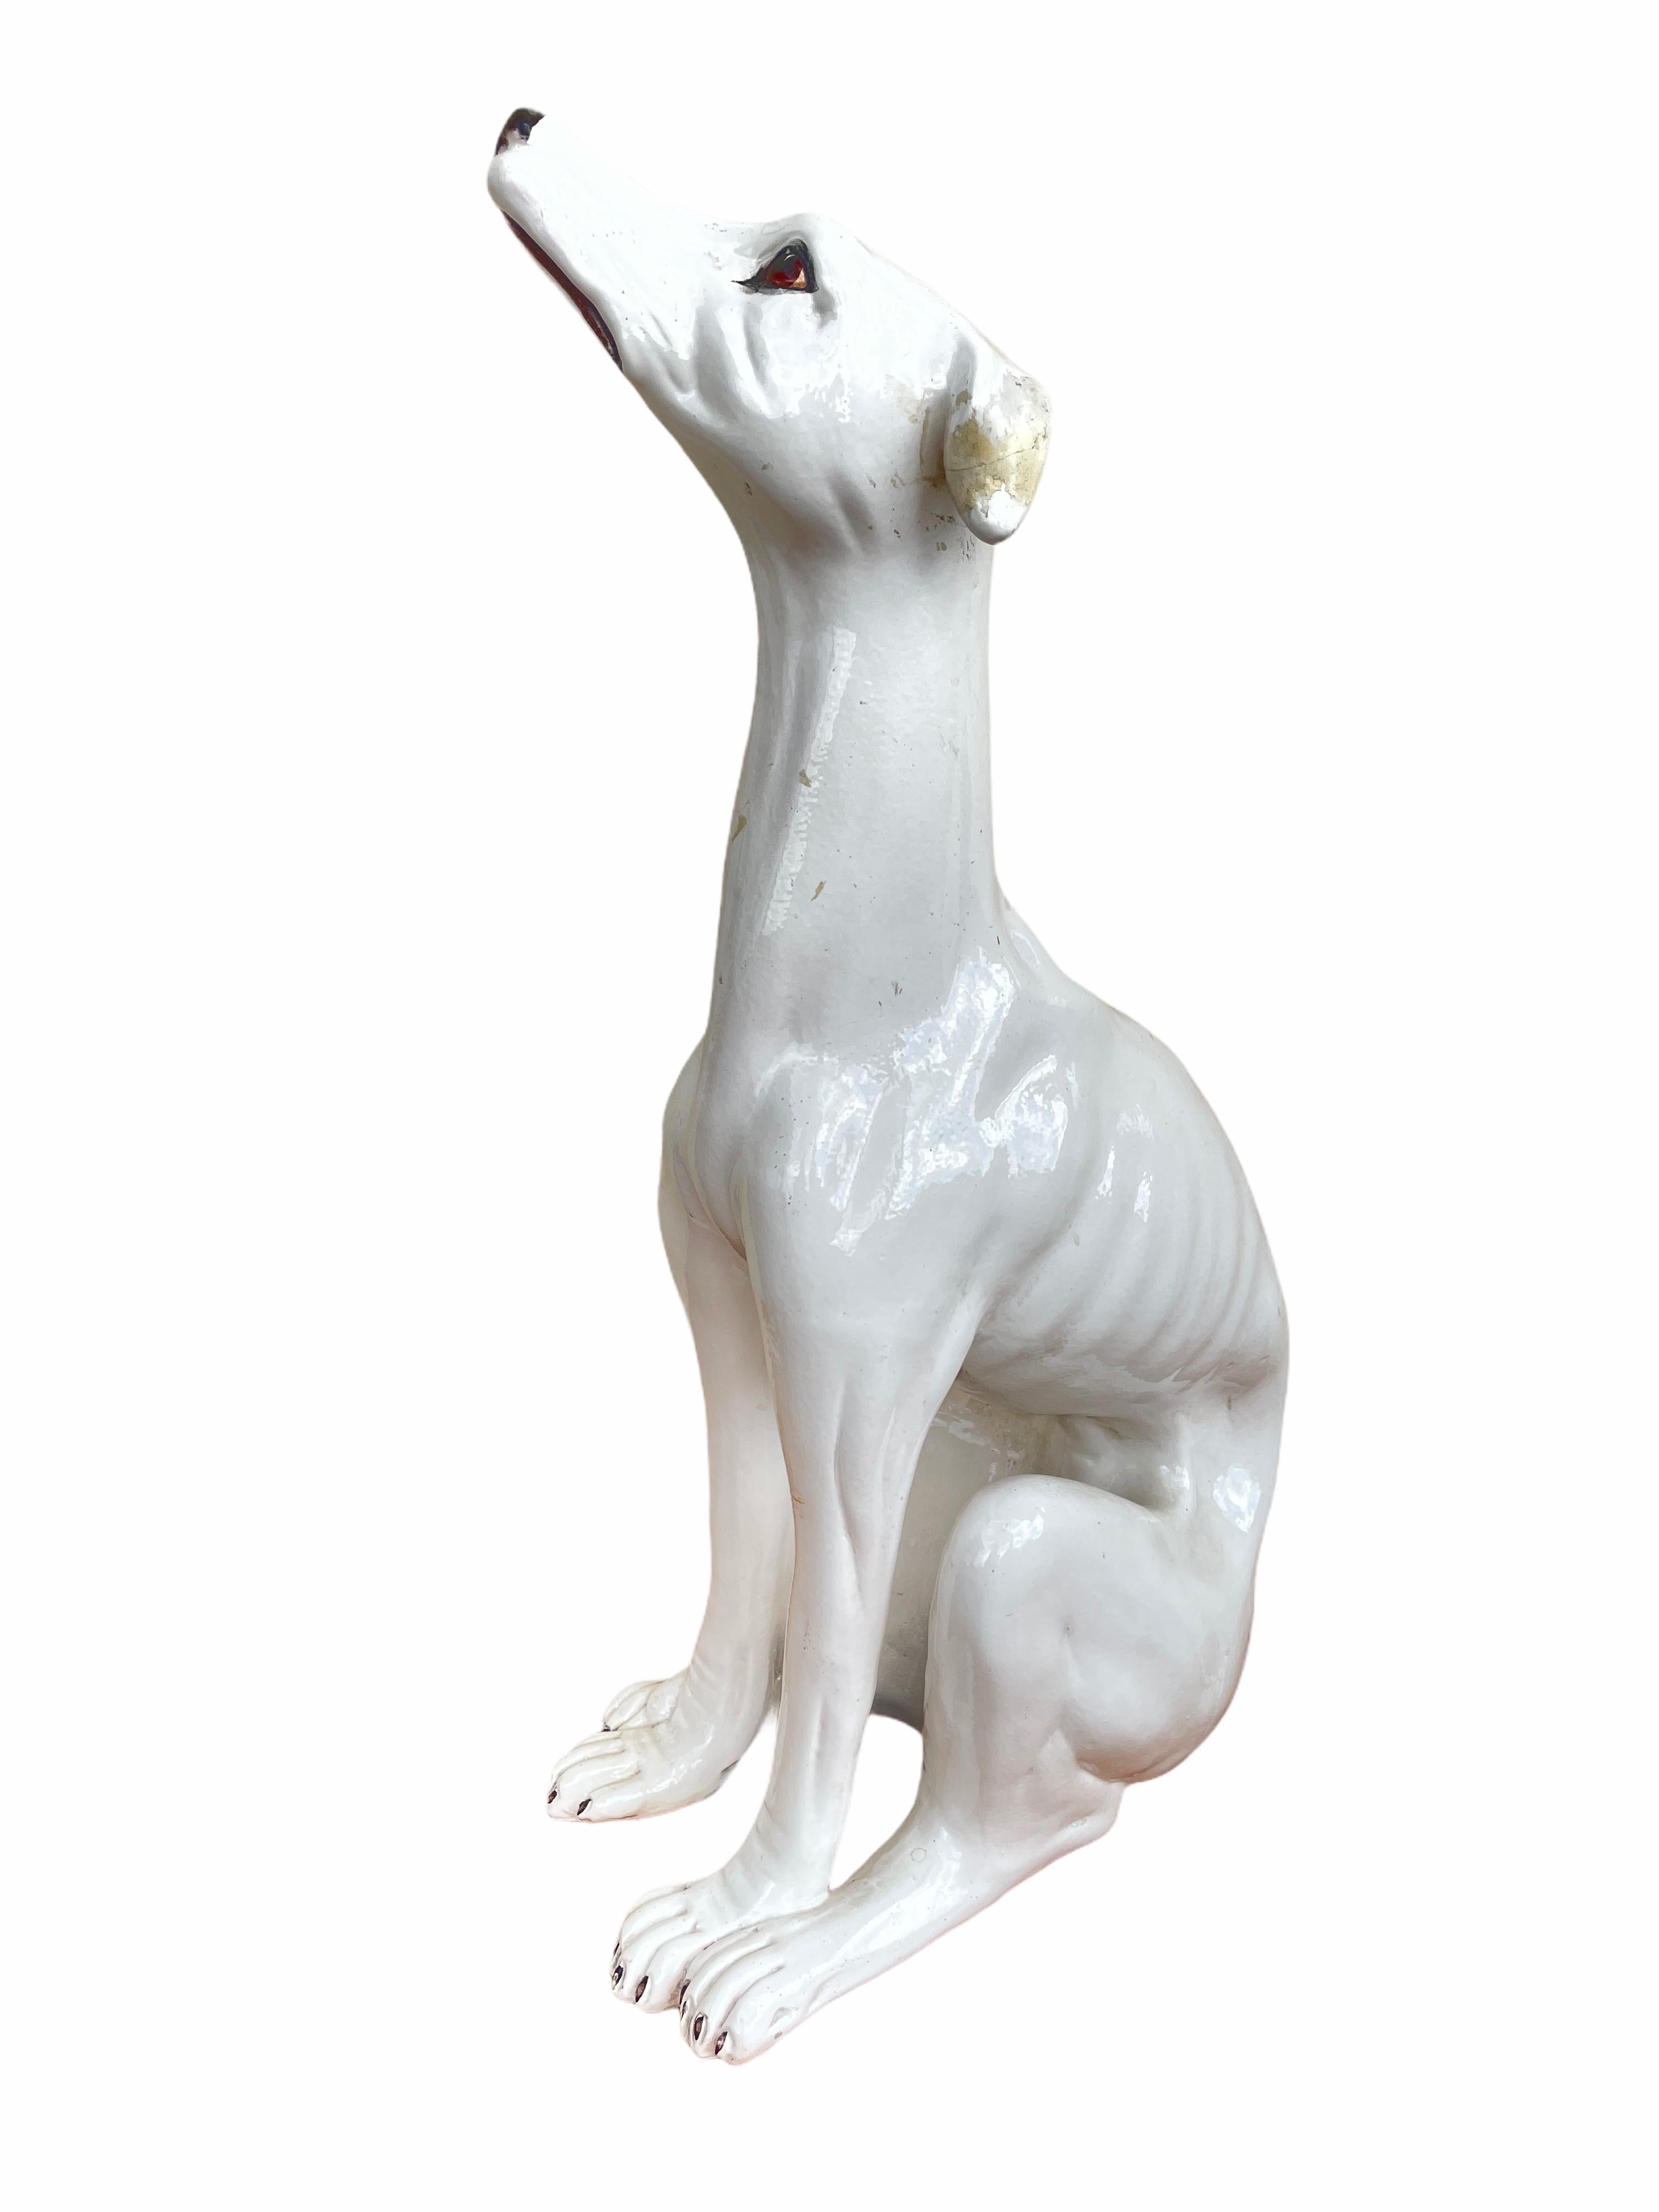 Classic early 1930s Italian Greyhound Majolica dog statue figurine. Nice addition to your room or entry hall. Made of majolica ceramic, hand painted. The left ear has been professionally restored, but this does not affect the expression and the